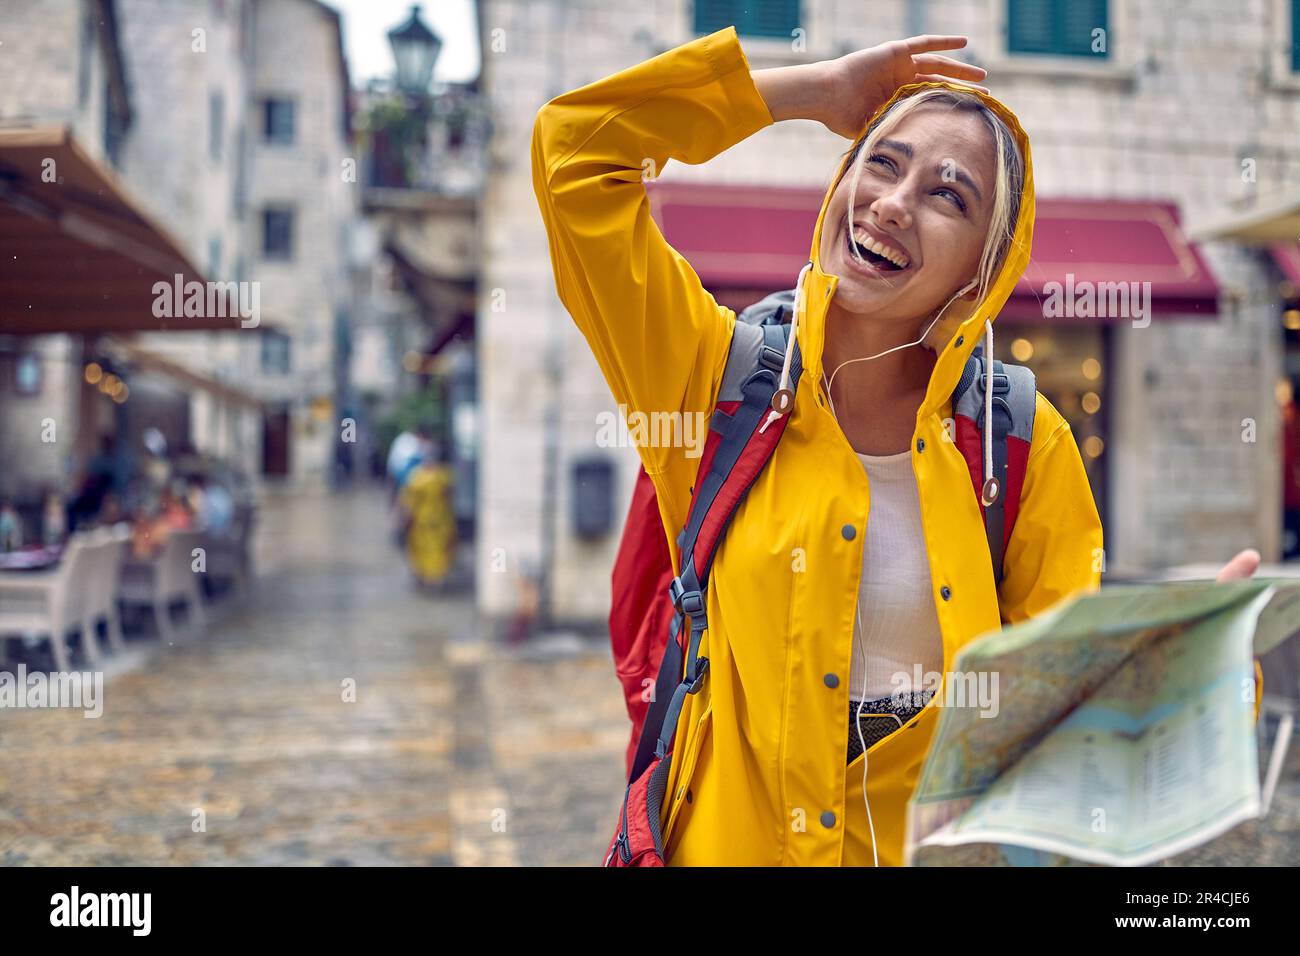 Walk in city in rain. Young tourist woman in raincoat with map, feeling happy, smiling. Travel in new city. Tourism, lifestyle, fun, concept. Stock Photo